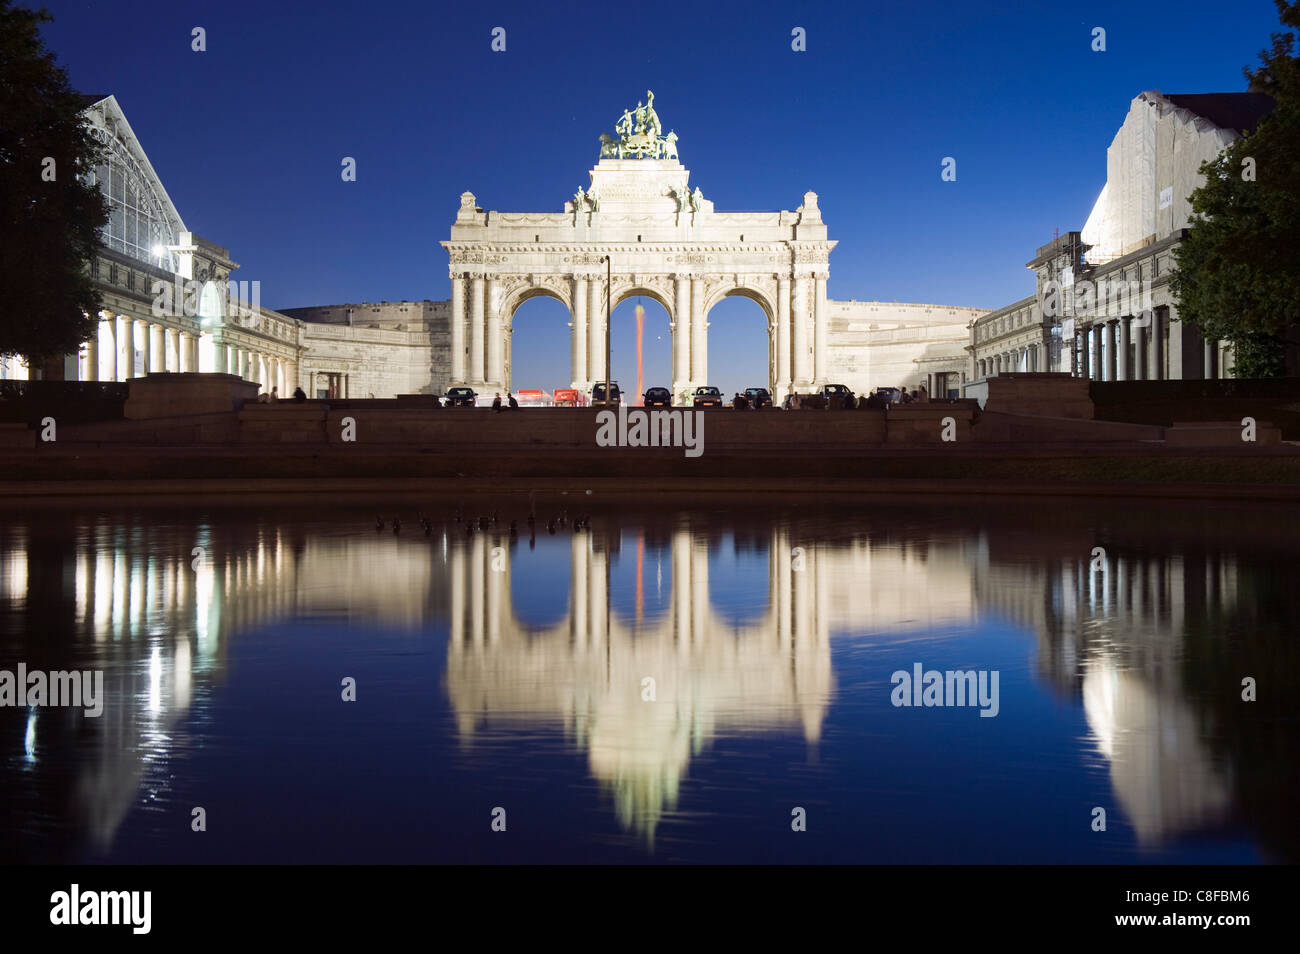 Arcade du Cinquantenaire, arch built in 1880 to celebrate 50 years of Belgian independence, Brussels, Belgium Stock Photo